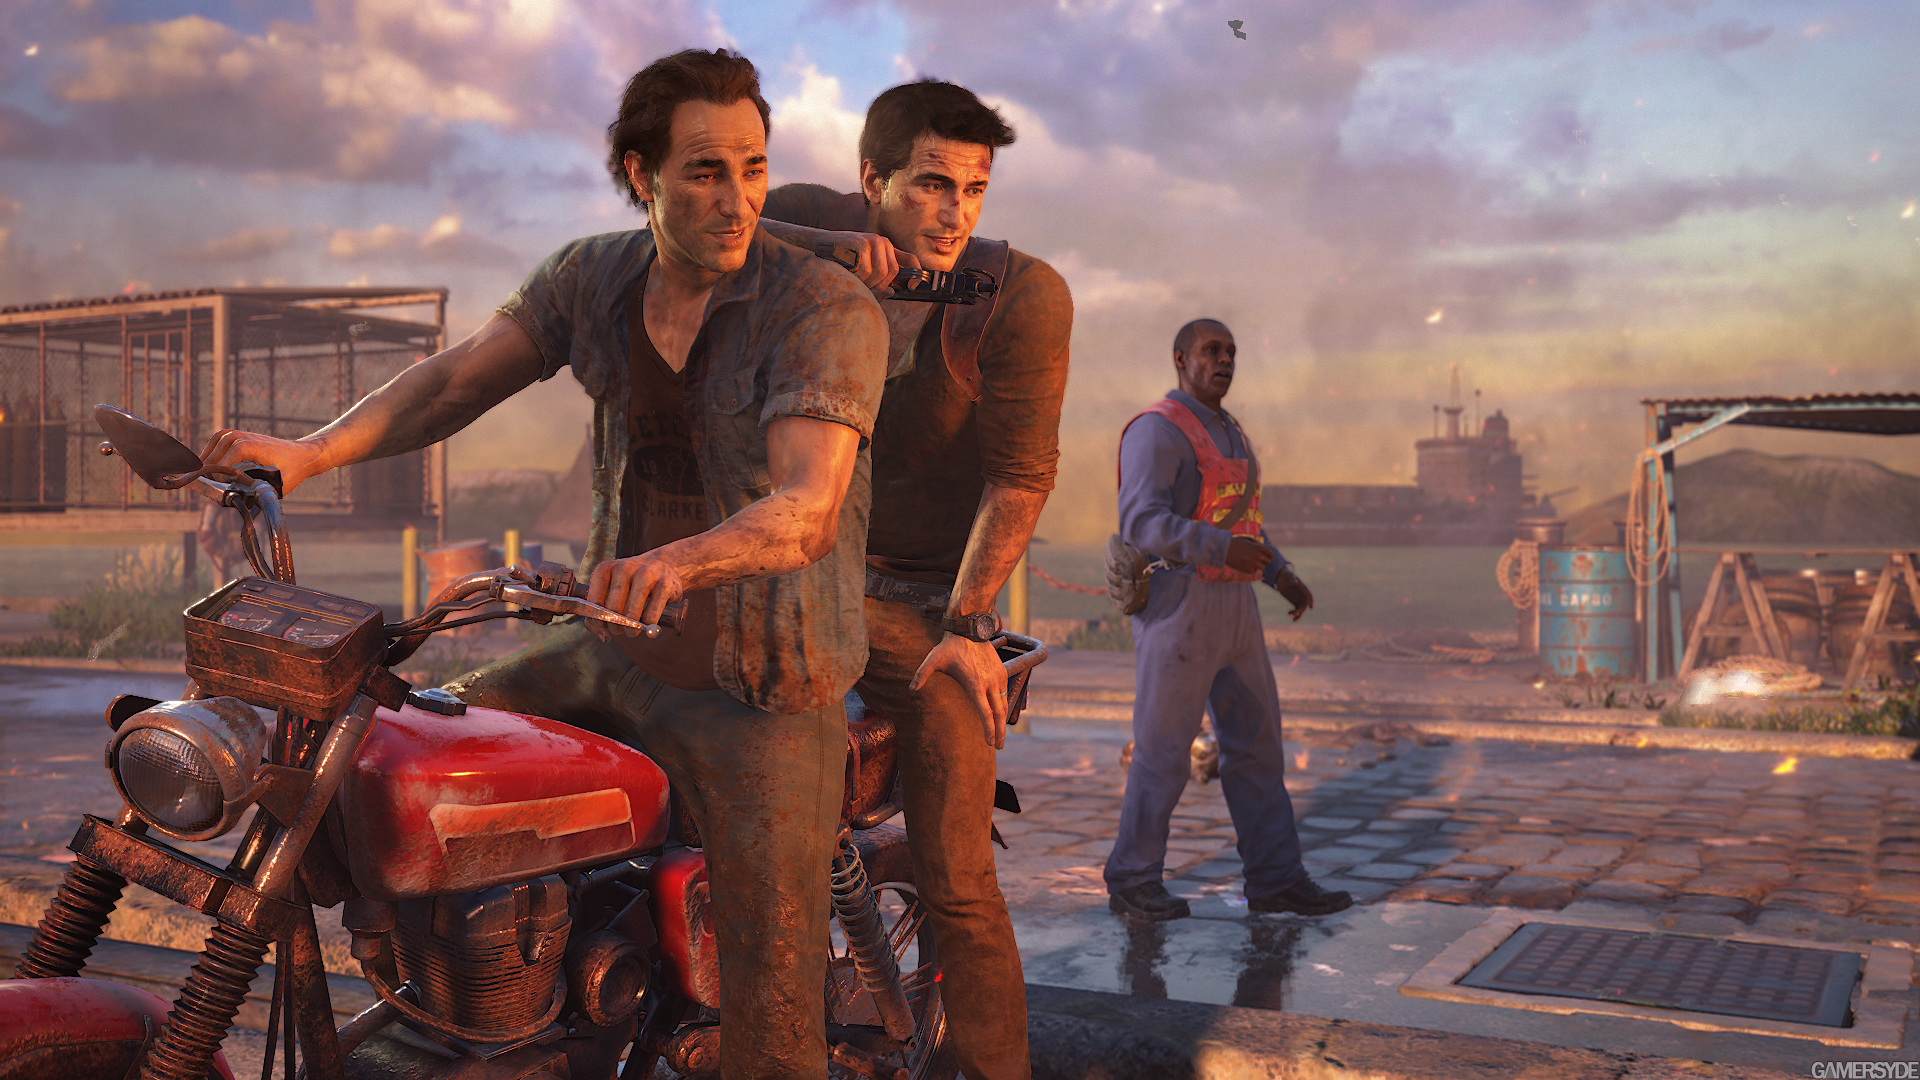 image_uncharted_4_a_thief_s_end-28644-2995_0016.jpg